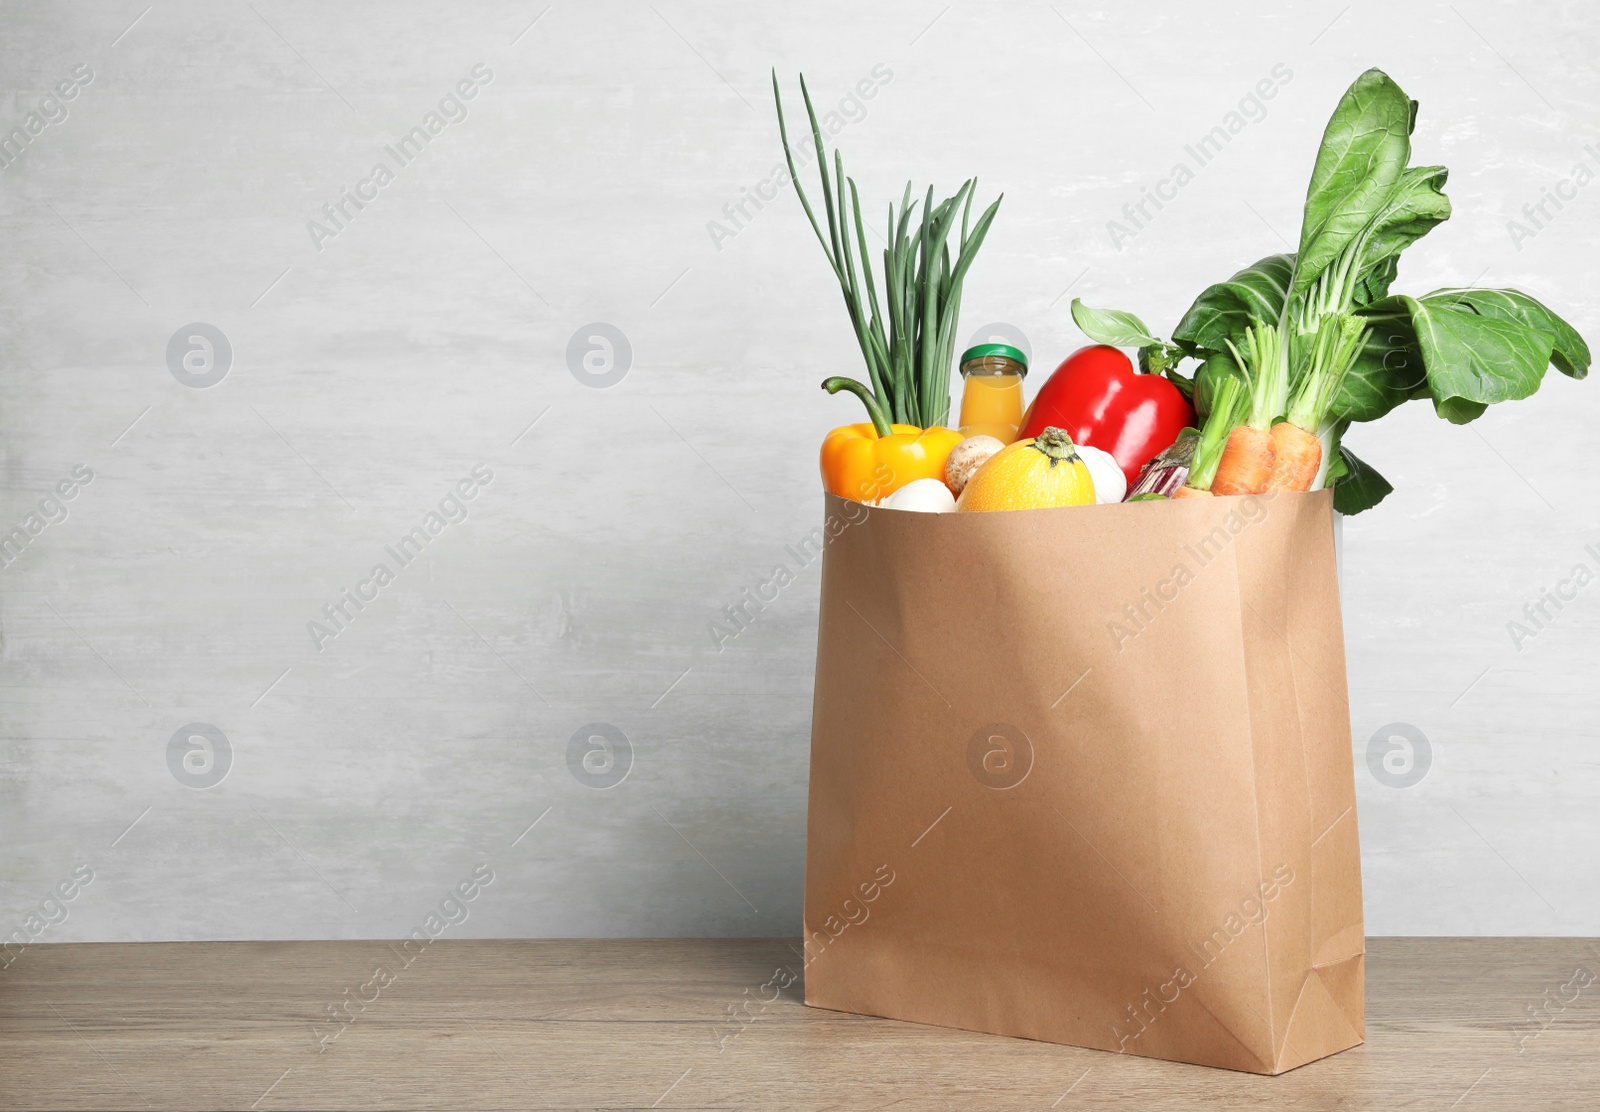 Photo of Paper bag with vegetables and bottle of juice on table against grey background. Space for text